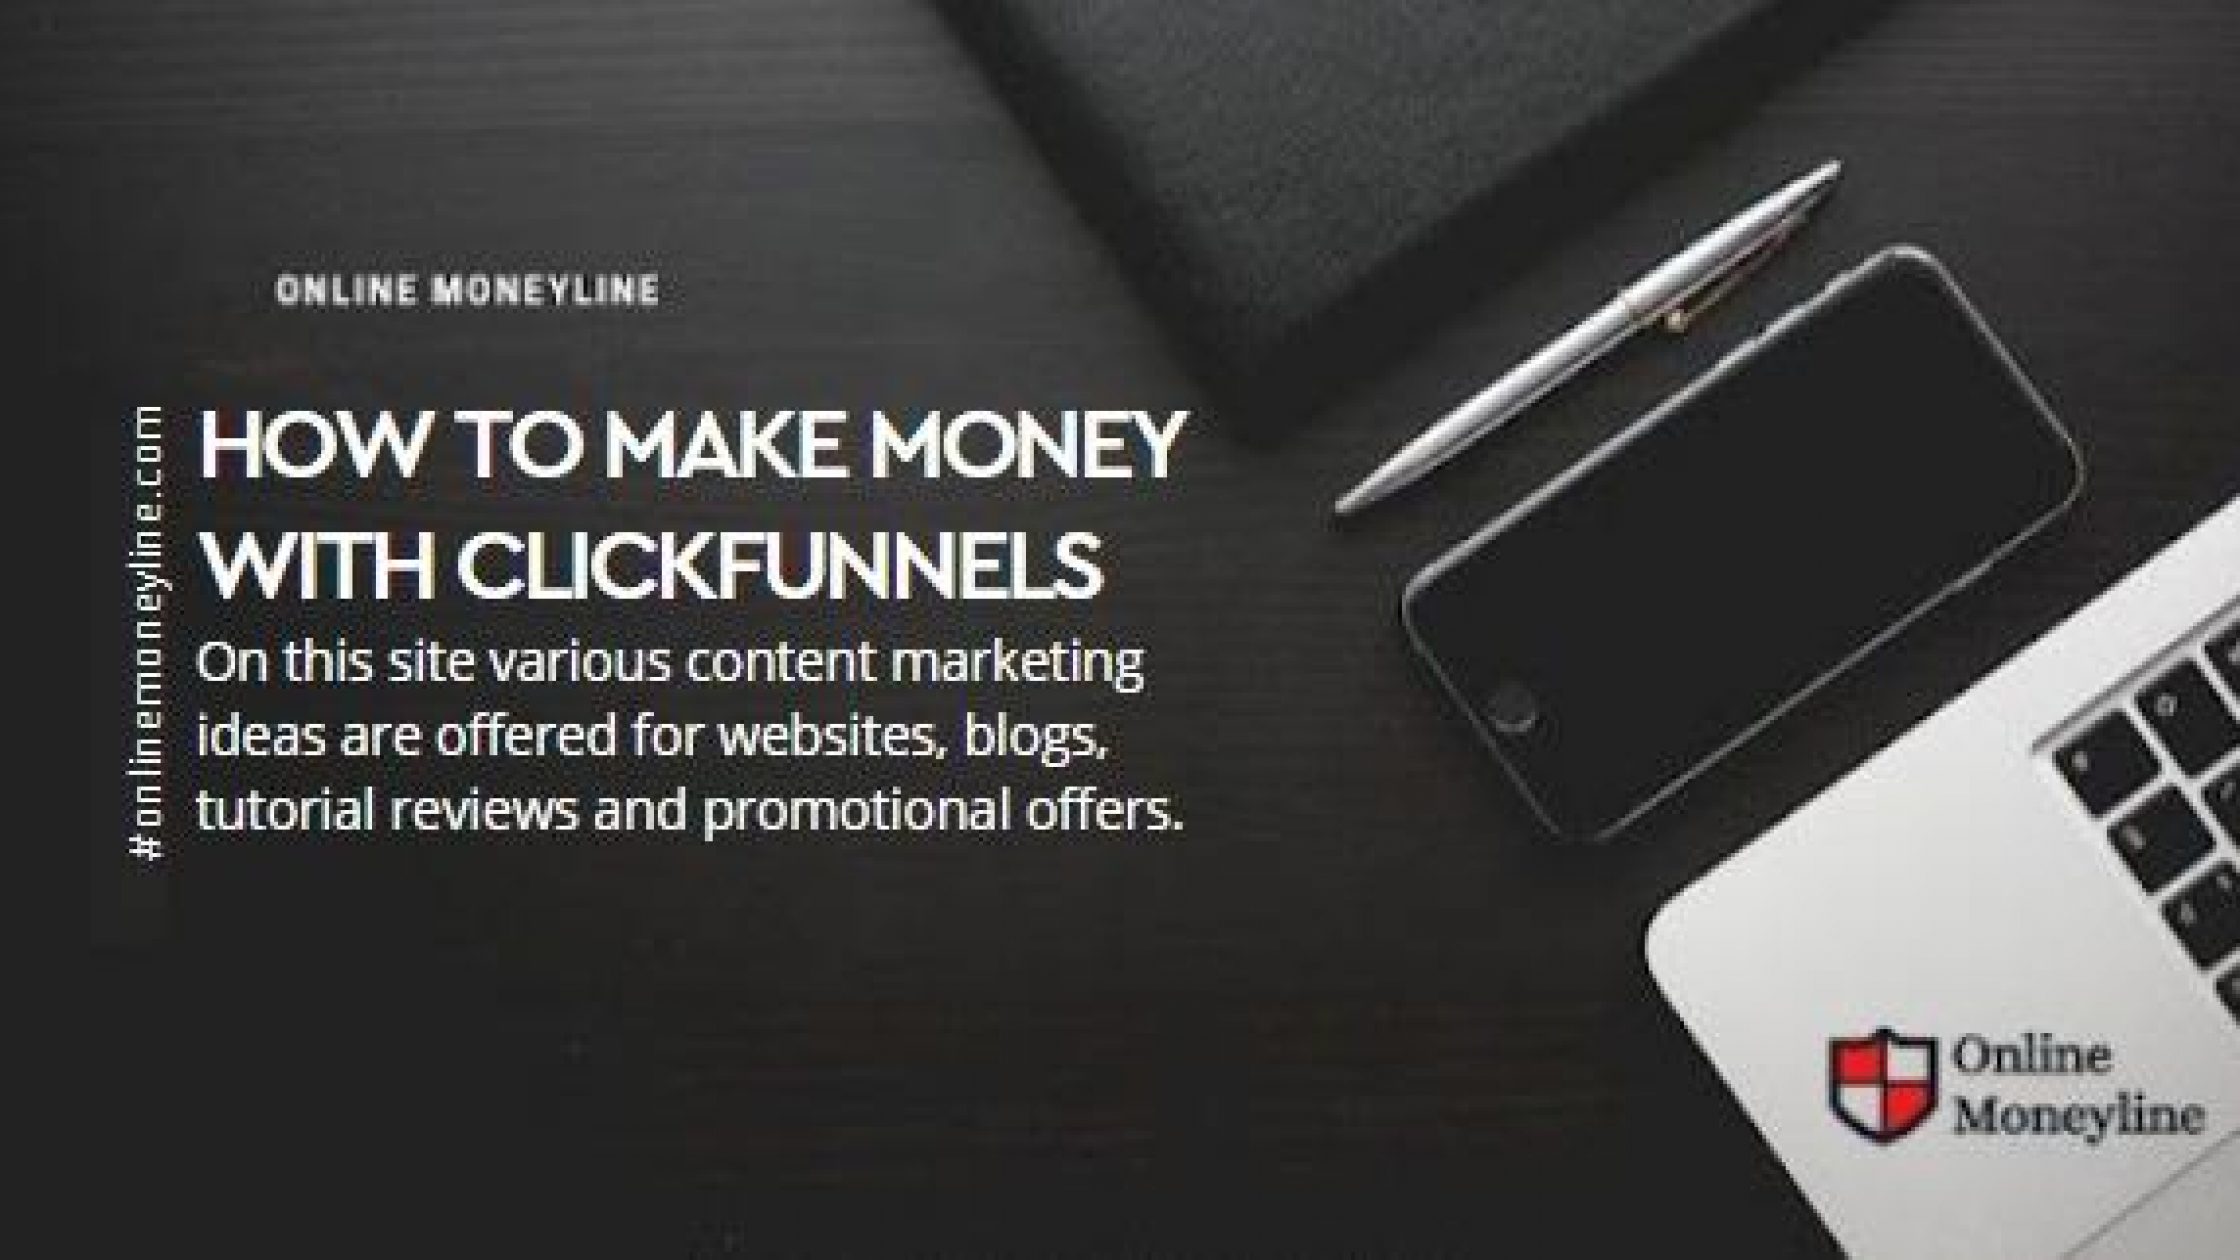 How to make money with ClickFunnels